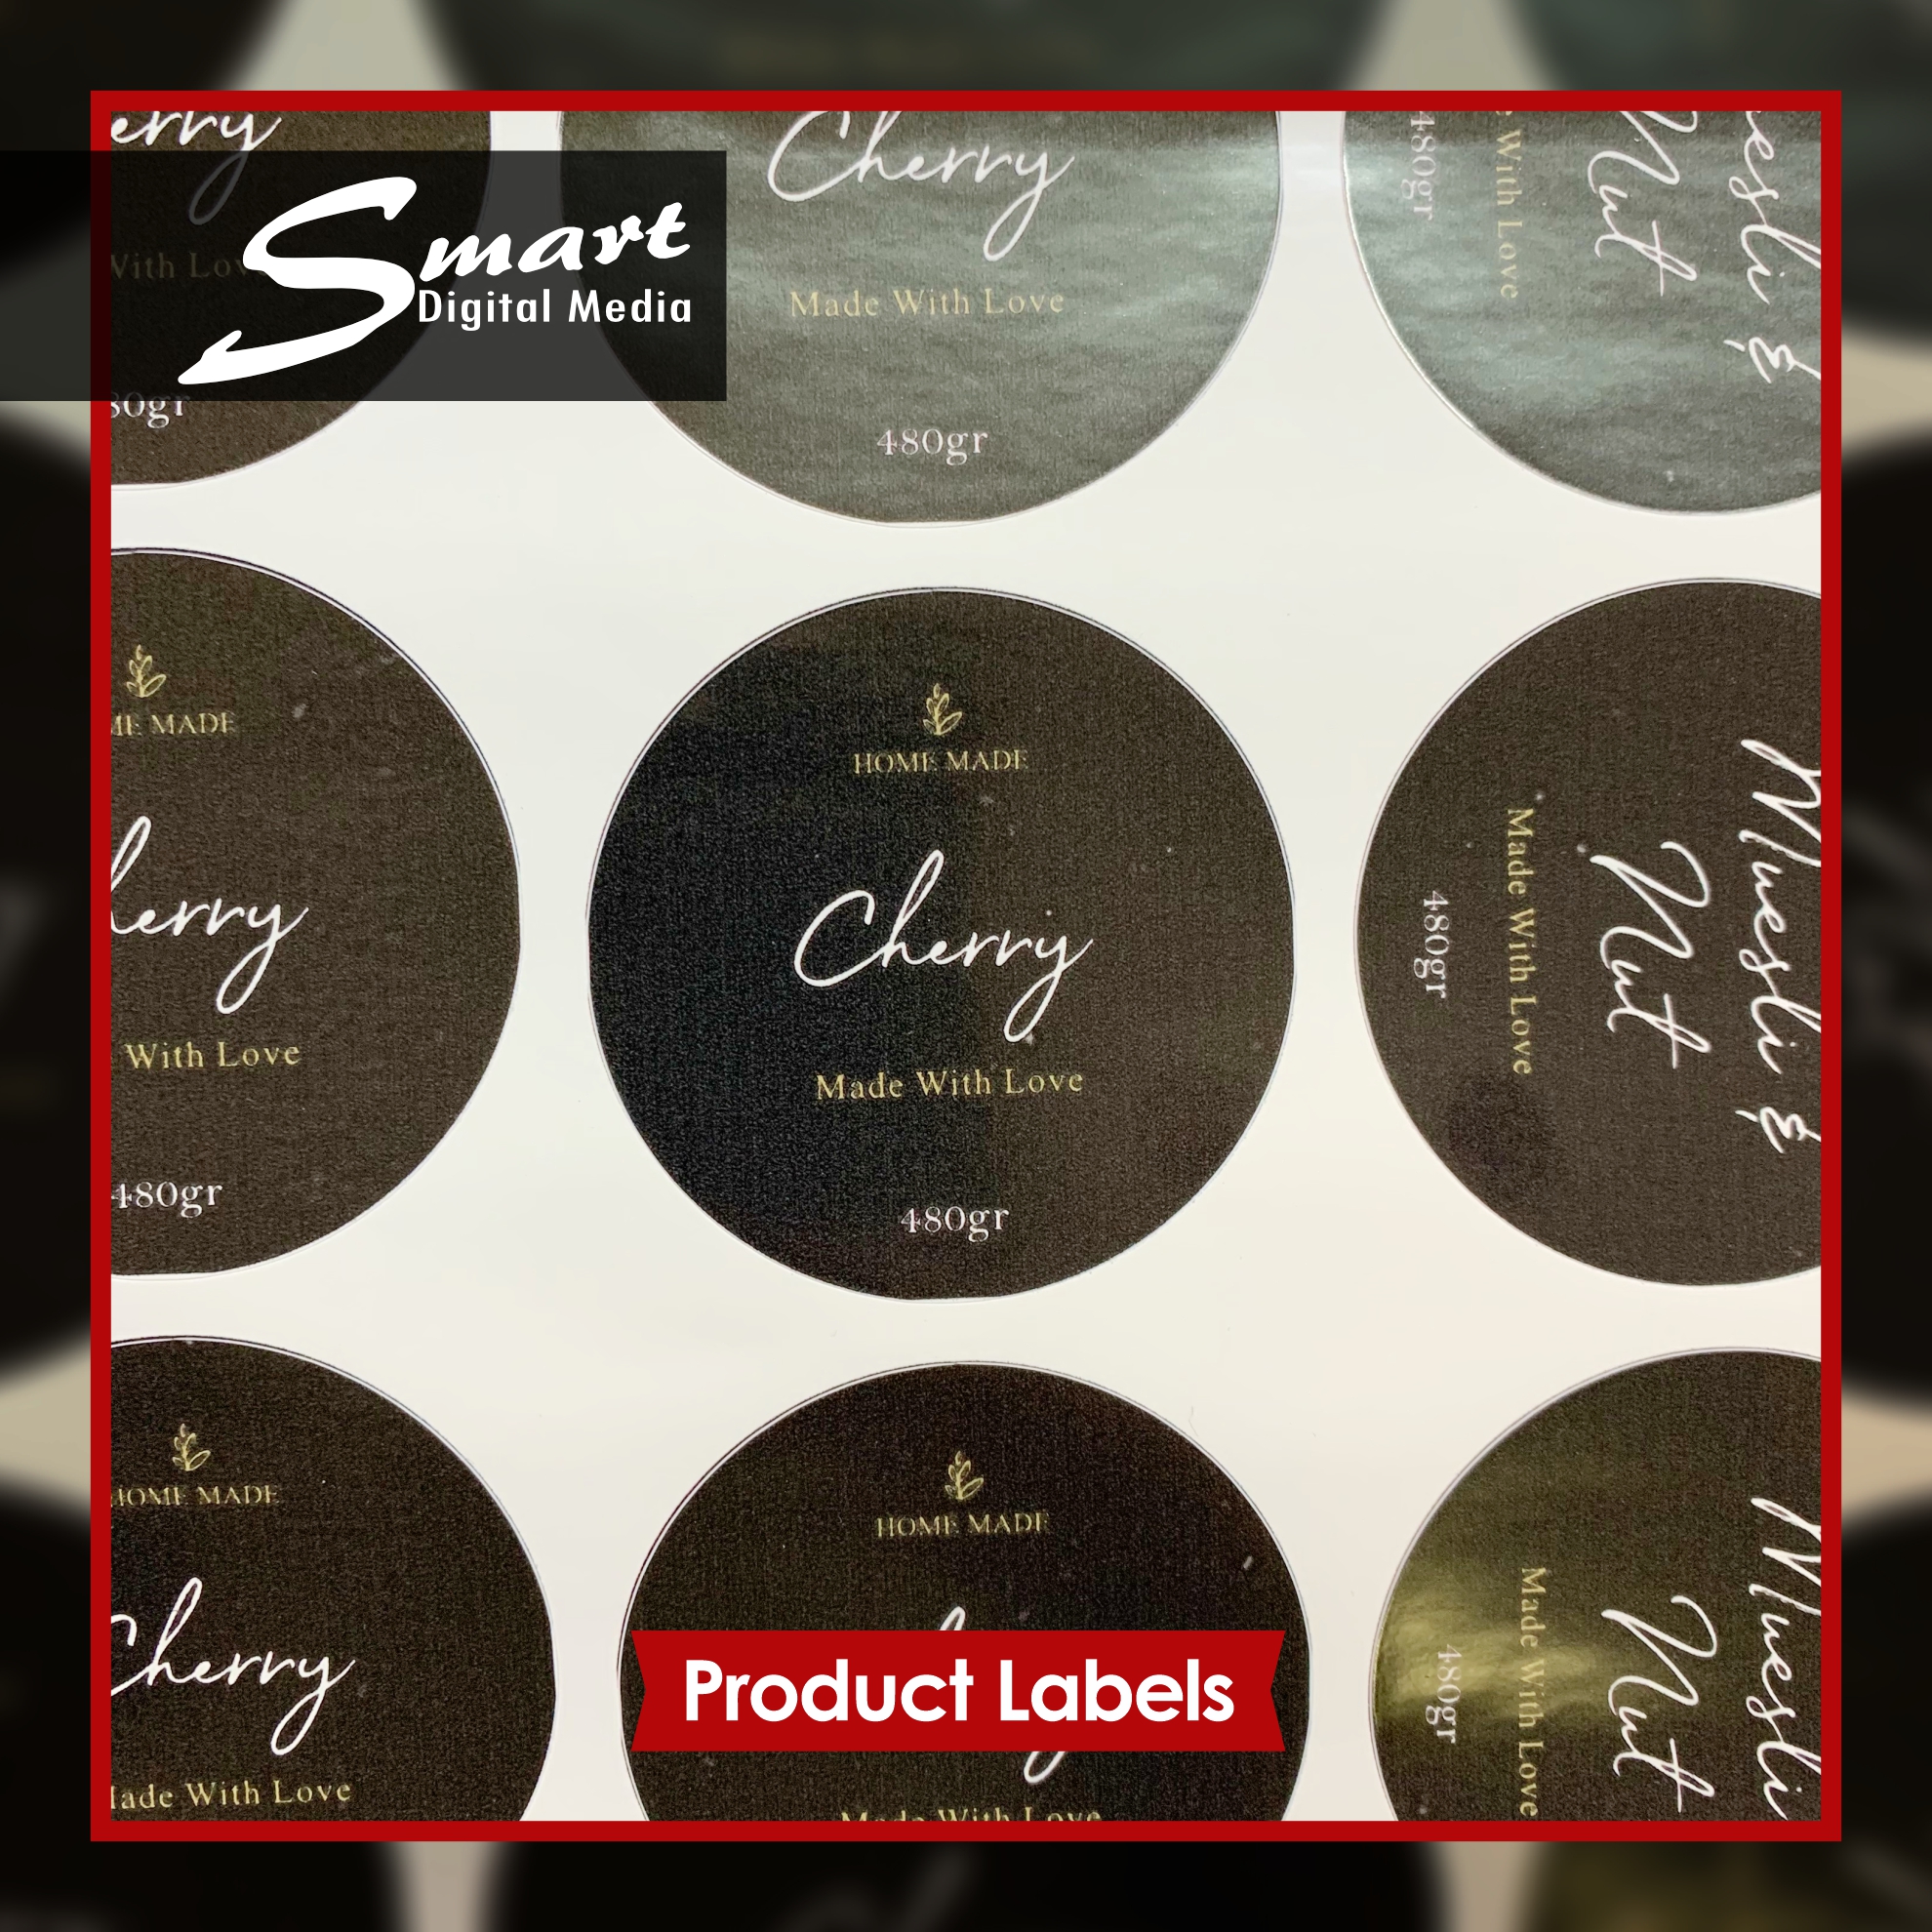 Vinyl sheet with rows of round black product sticker labels.